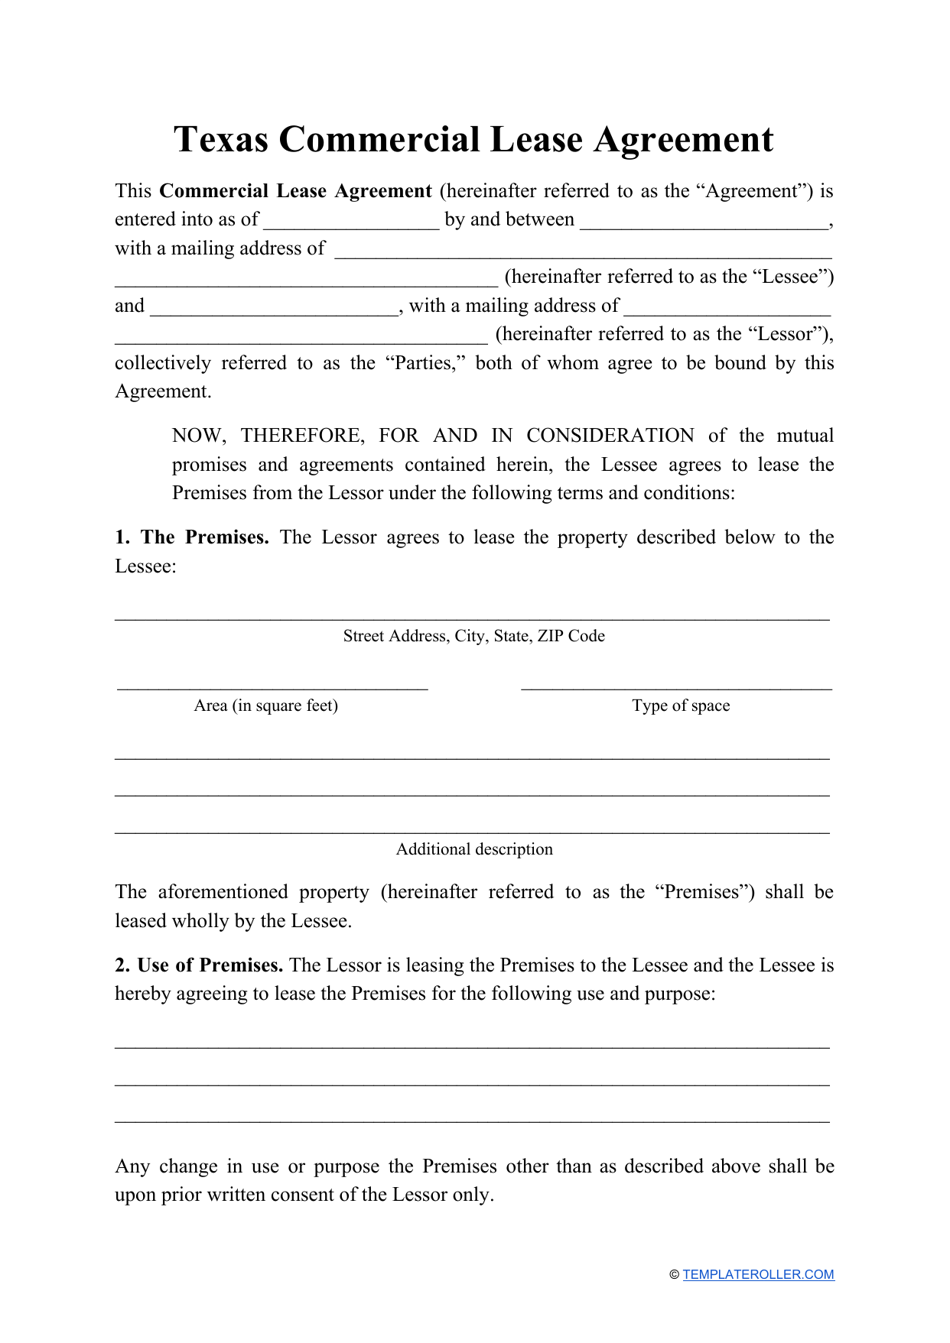 texas-commercial-lease-agreement-template-download-printable-pdf-templateroller